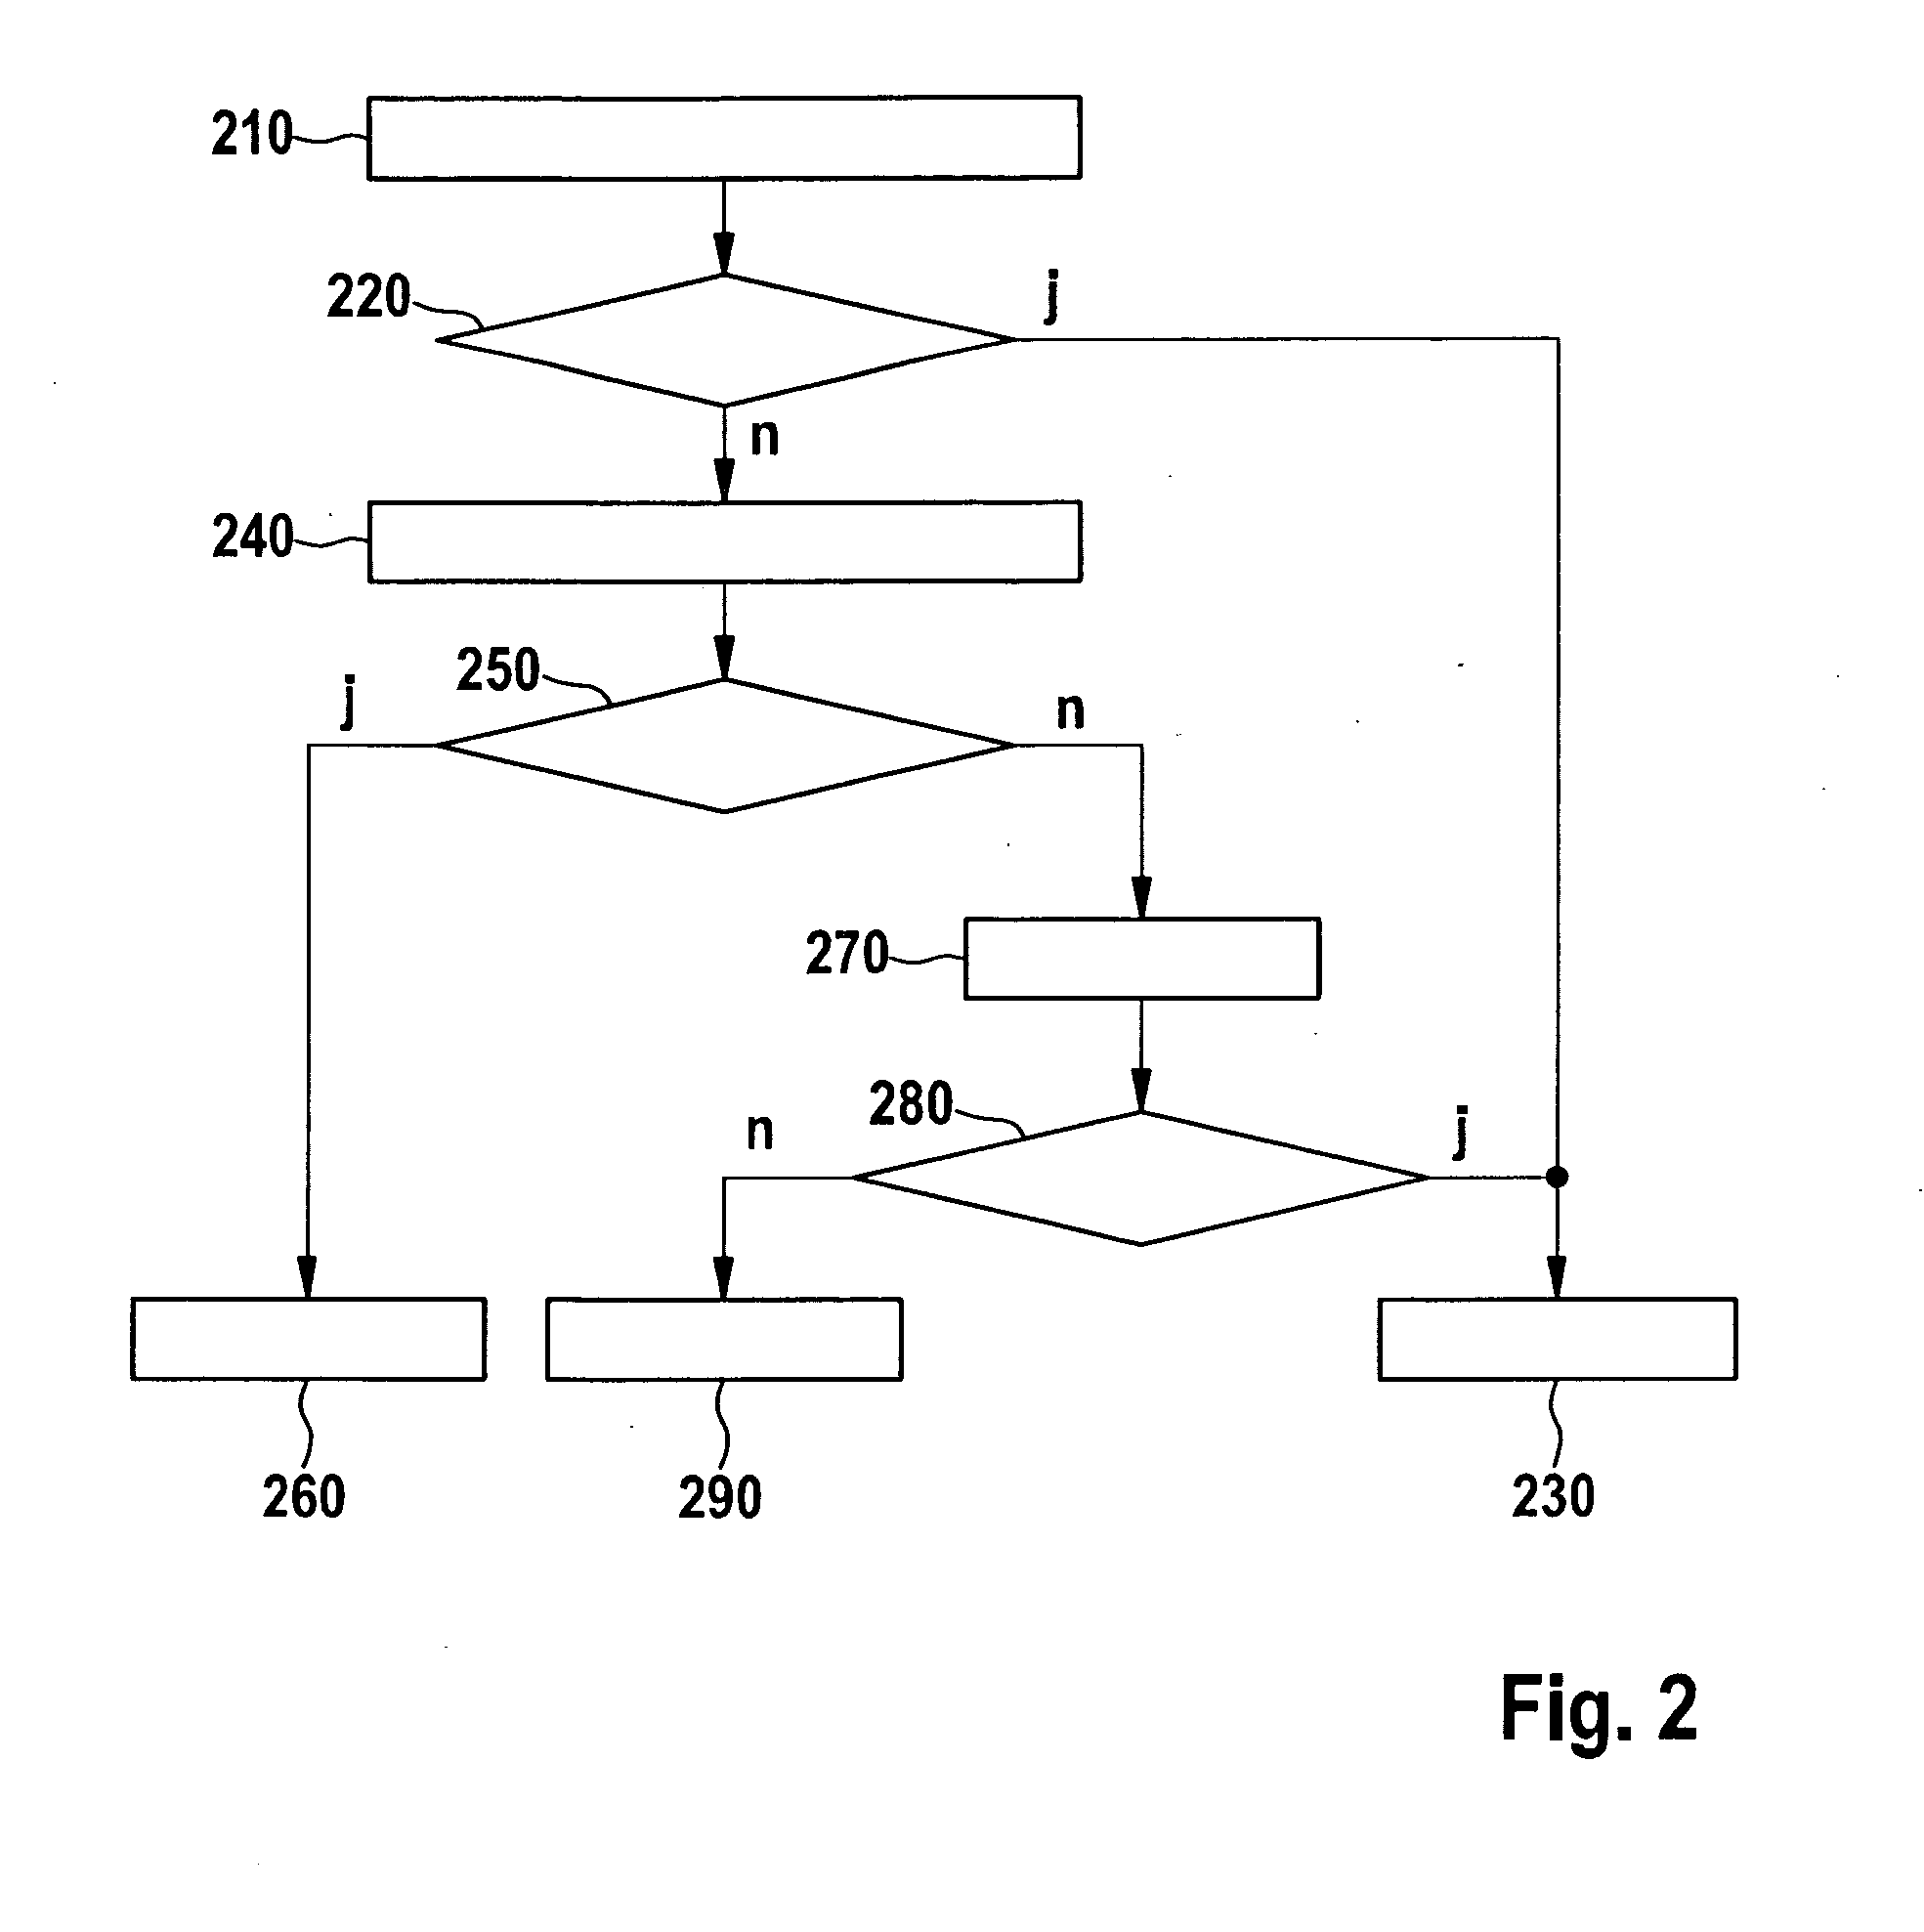 Method for testing the operability of a tank shutoff valve of a fuel tank system